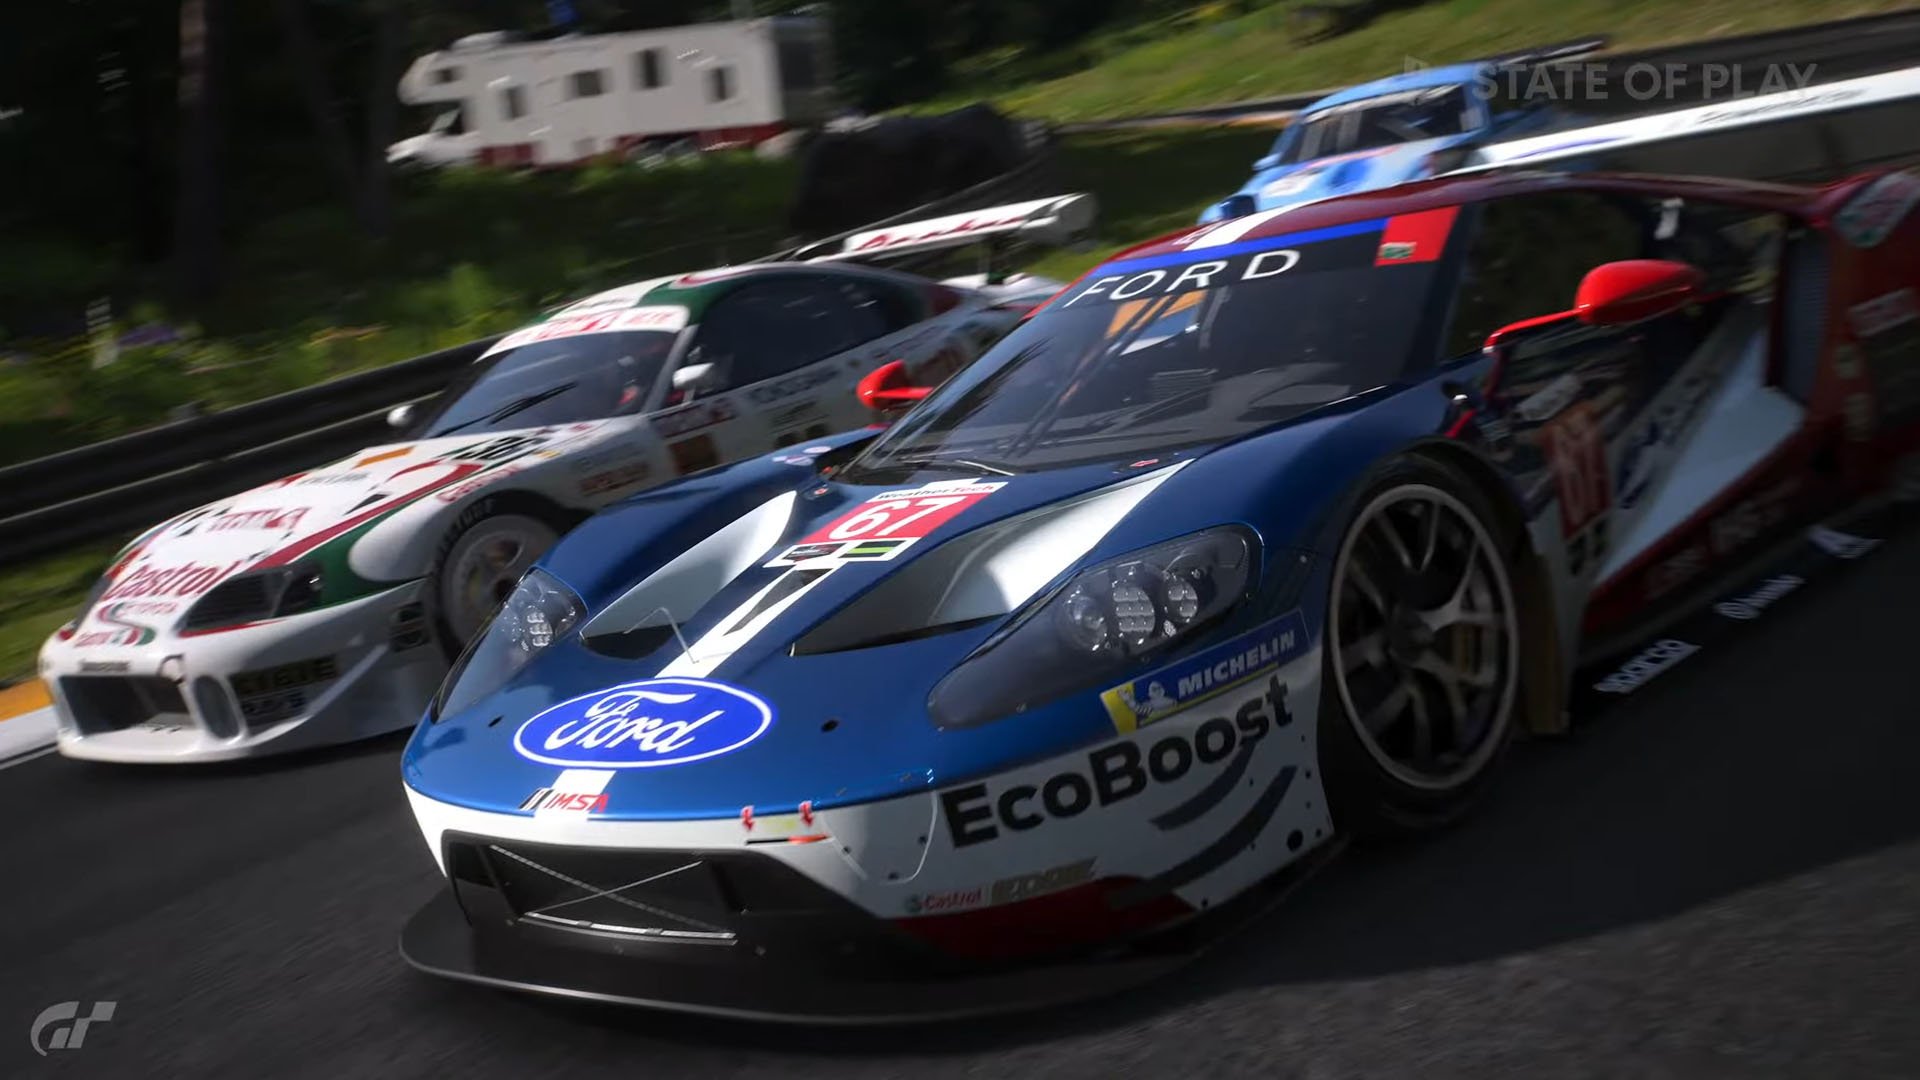 Here's Why Gran Turismo 7 Campaign Mode Requires Internet